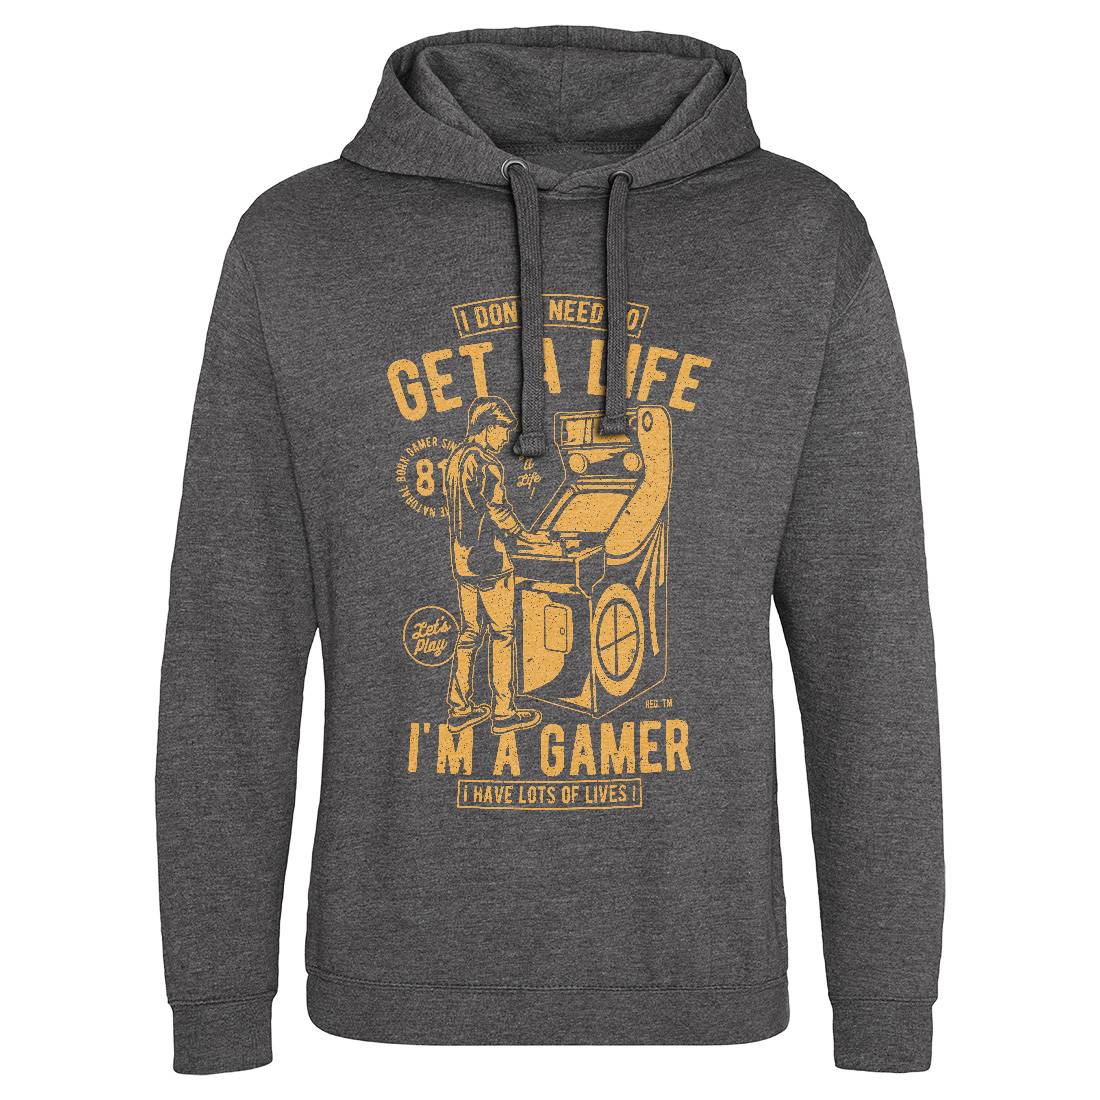 Get A Life Mens Hoodie Without Pocket Geek A672